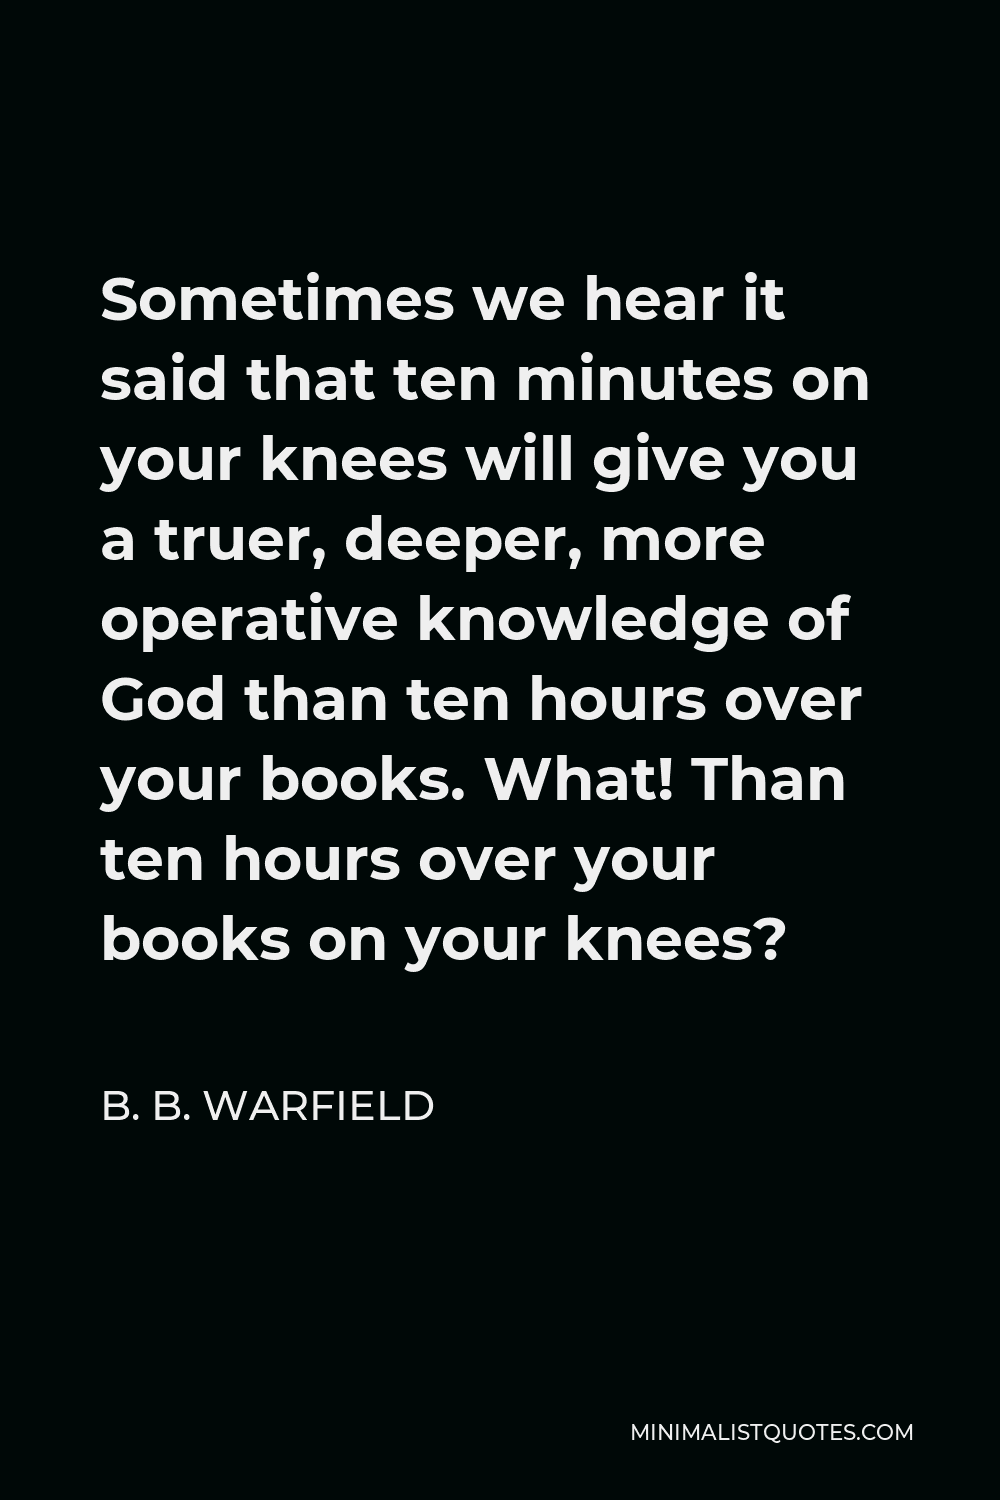 B. B. Warfield Quote - Sometimes we hear it said that ten minutes on your knees will give you a truer, deeper, more operative knowledge of God than ten hours over your books. What! Than ten hours over your books on your knees?